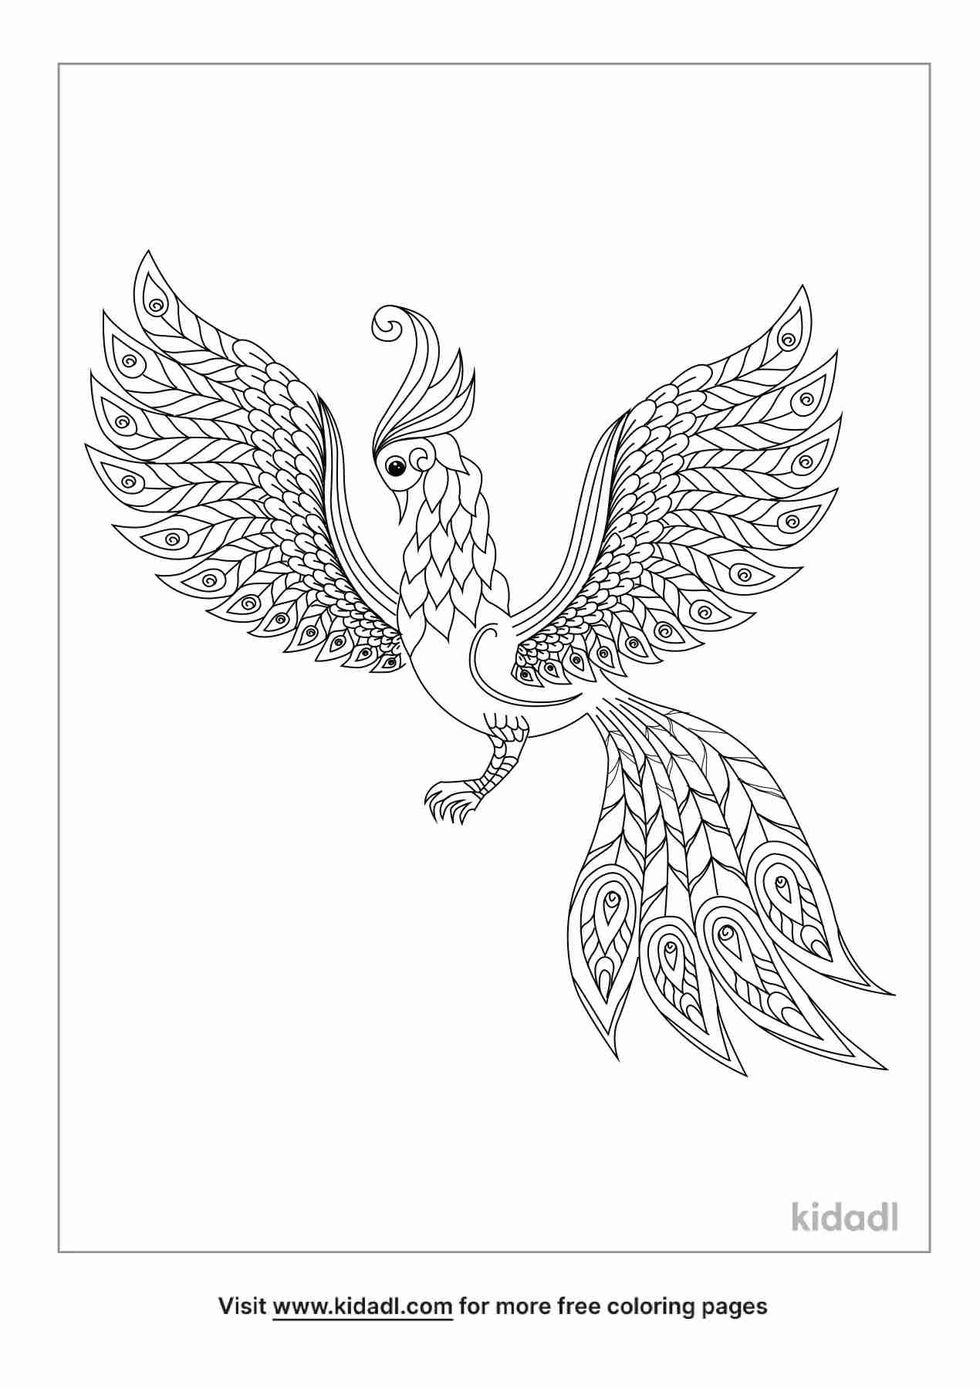 Exotic bird art coloring pages for kids.